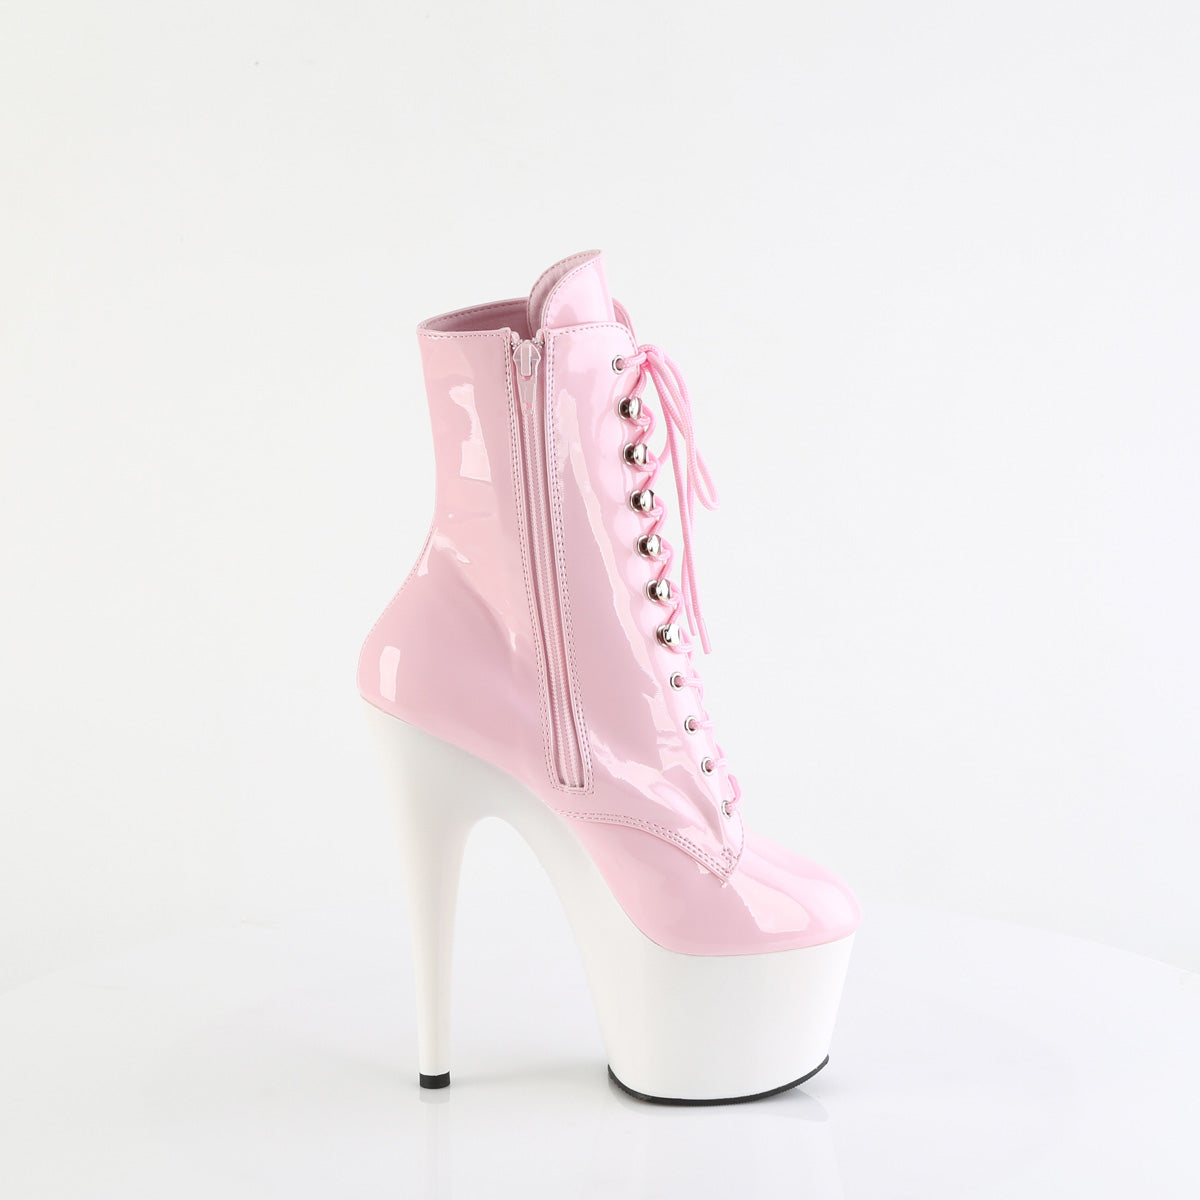 ADORE-1020 Pink & White Calf High Boots  Multi view 2